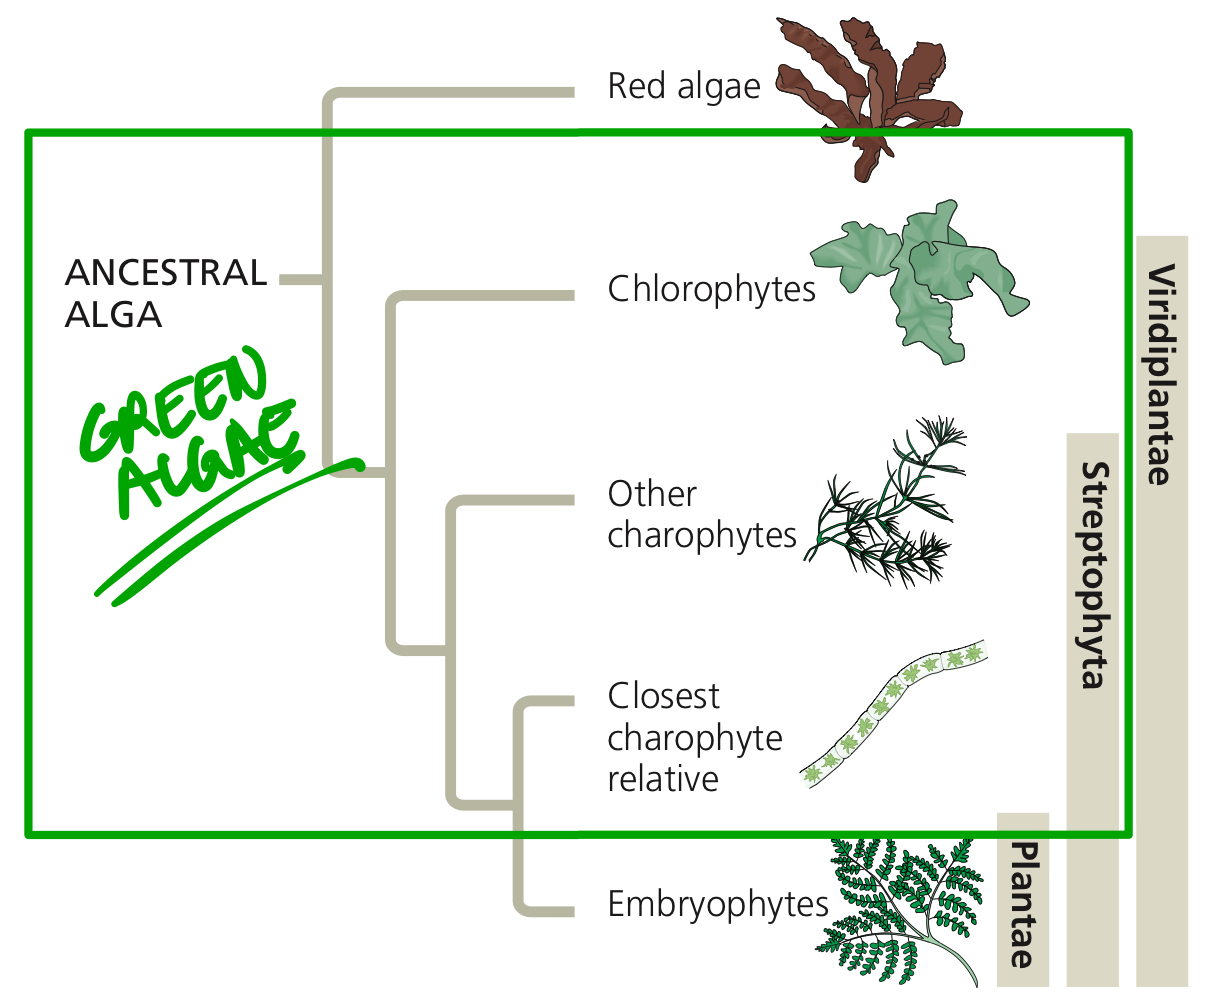 <p>Archaeplastida paraphyletic group, composed of chlorophytes and charophytes.</p>